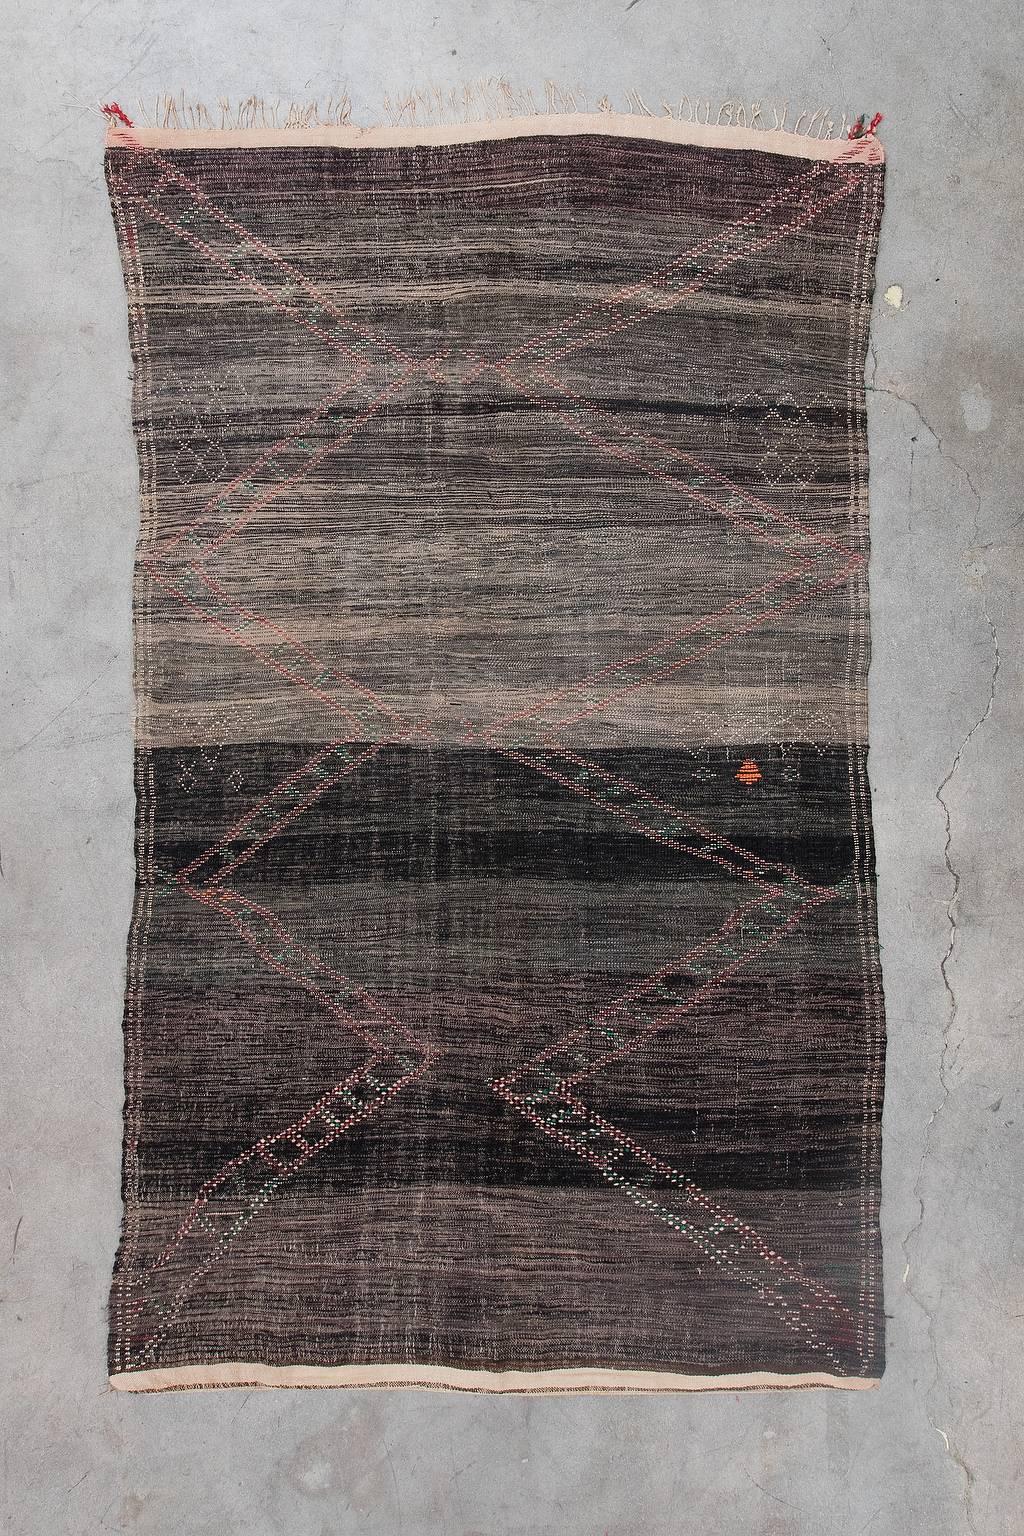 The Beni M'Rirt tribe yields from the Middle Atlas region of Morocco. Their rugs tend to be very plush, woven to provide warmth and comfort during the winter months. Beni M'Rirt rugs are well-known for their darker bold color combinations. You can